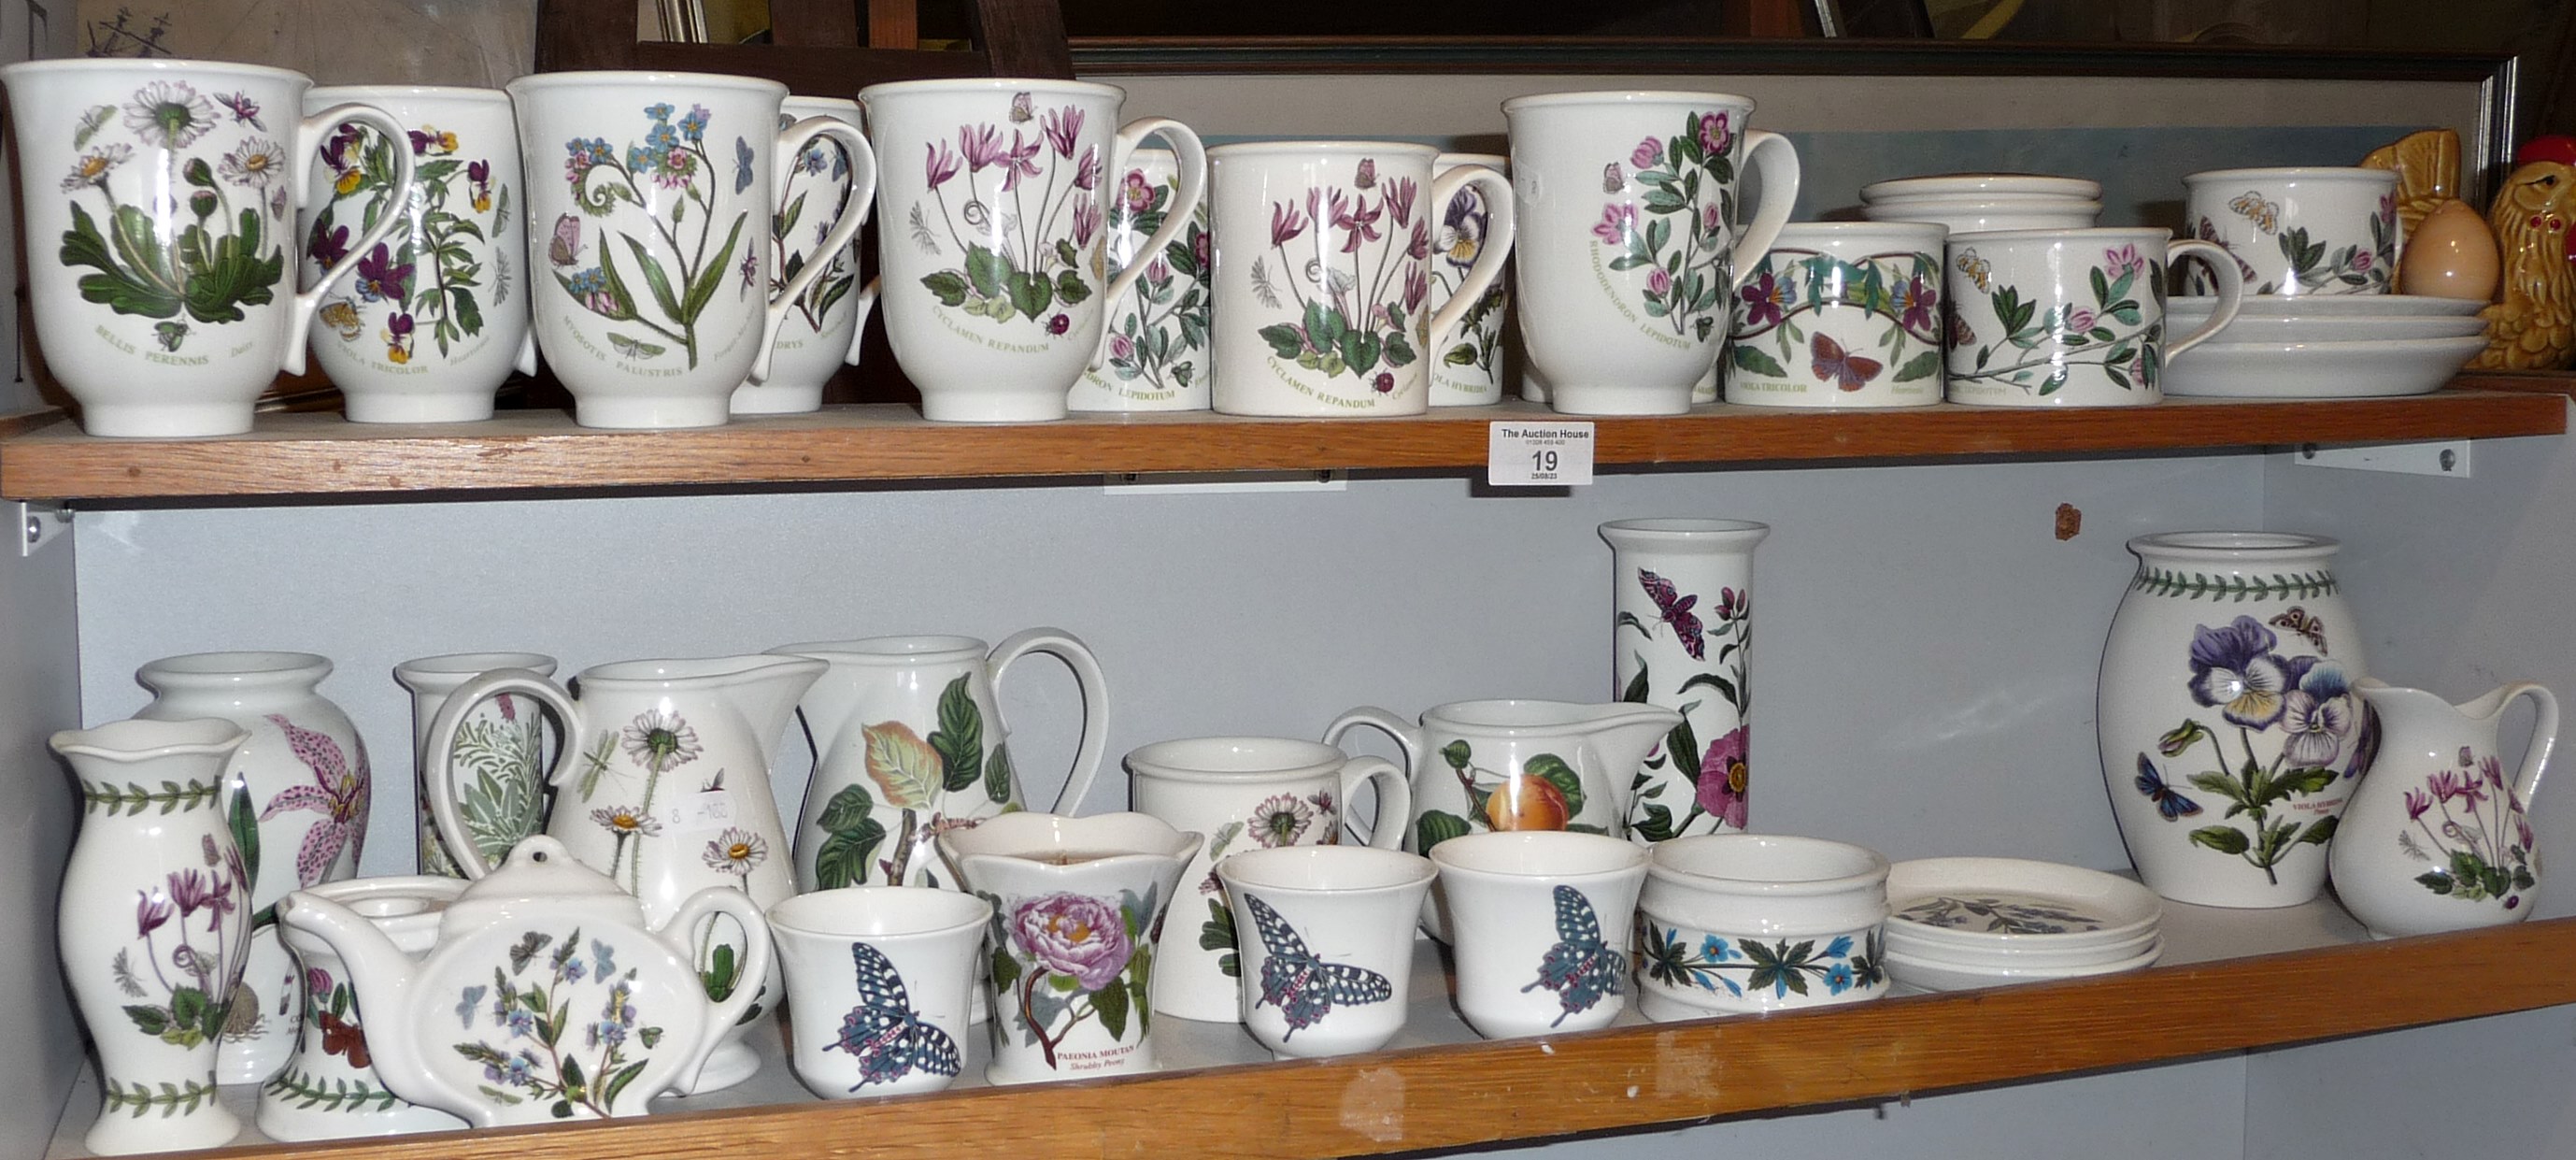 Collection of Portmeirion pottery mugs, cups and jugs, etc. (2 shelves)